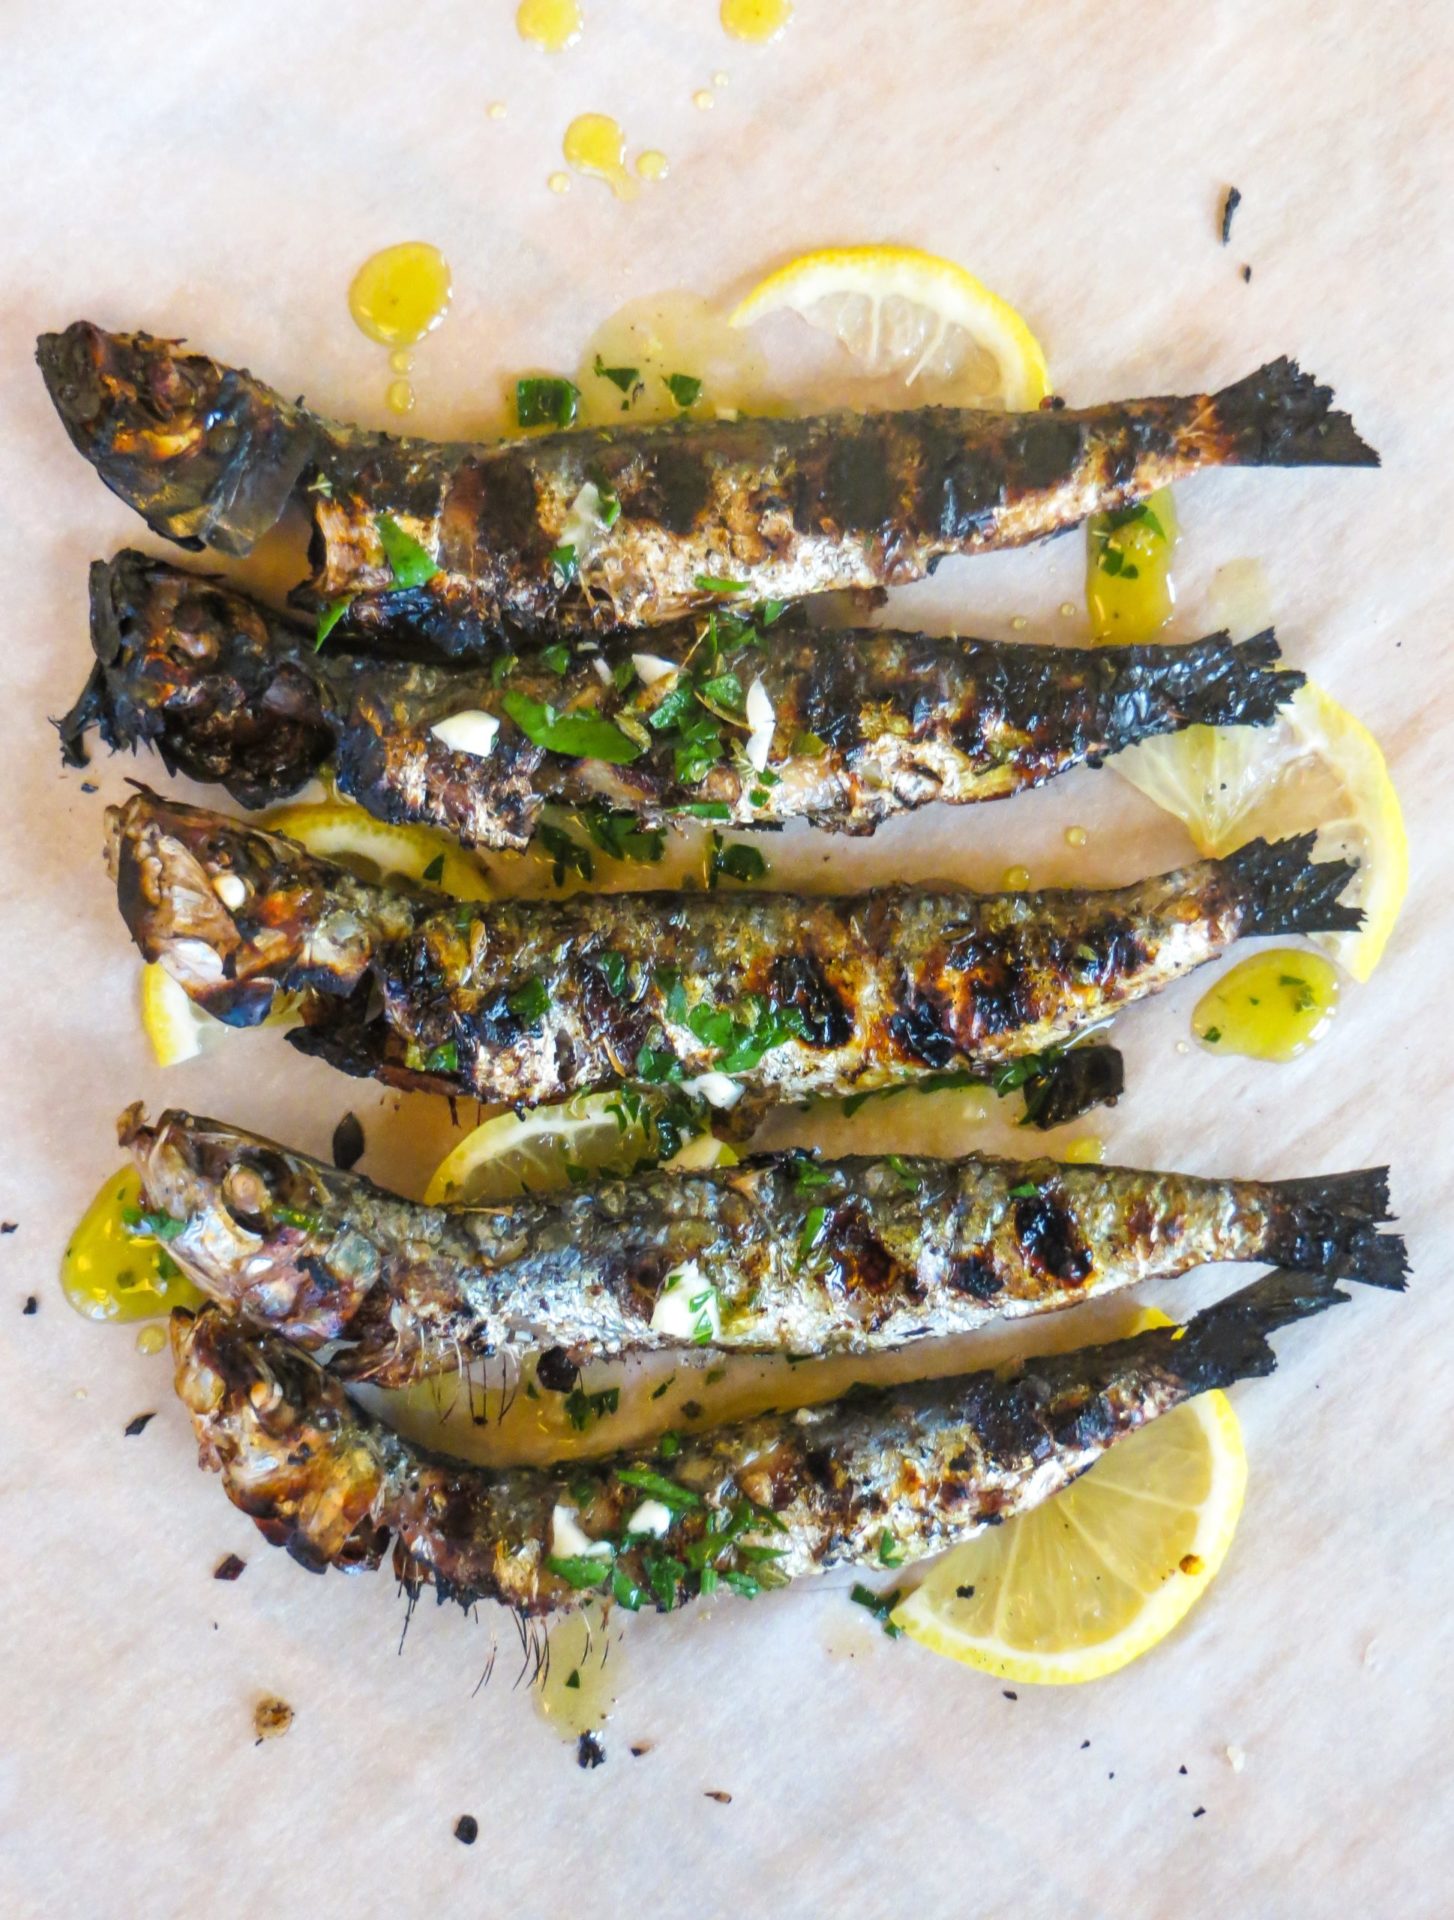 https://ouritaliantable.com/wp-content/uploads/2013/03/Grilled-Sardines1-1-of-1.jpg